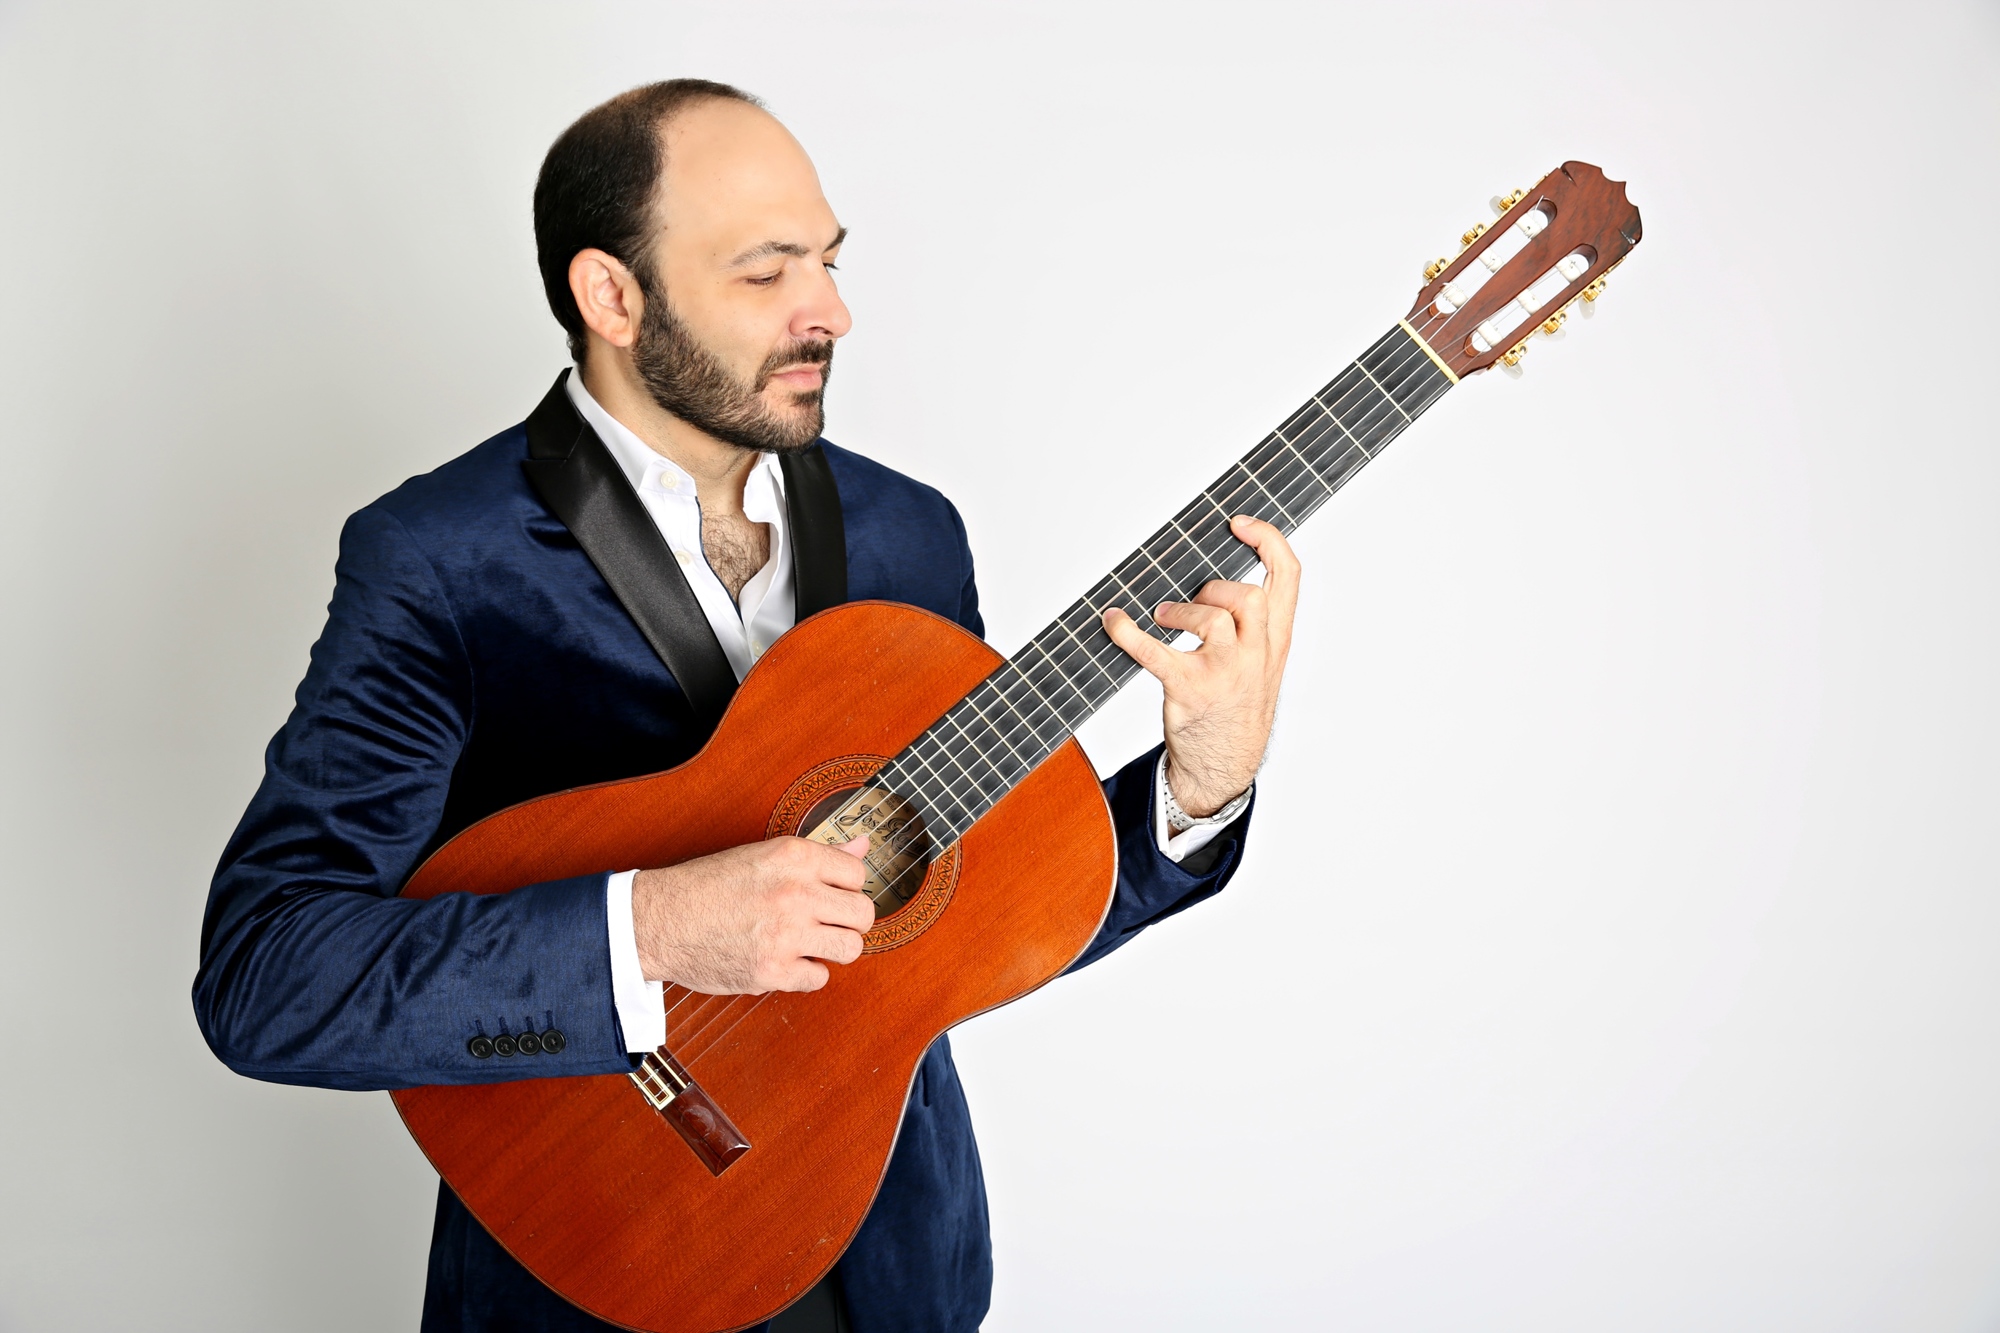 Nate Najar is guitarist, music producer and composer who specializes in classical jazz guitar. Courtesy photo